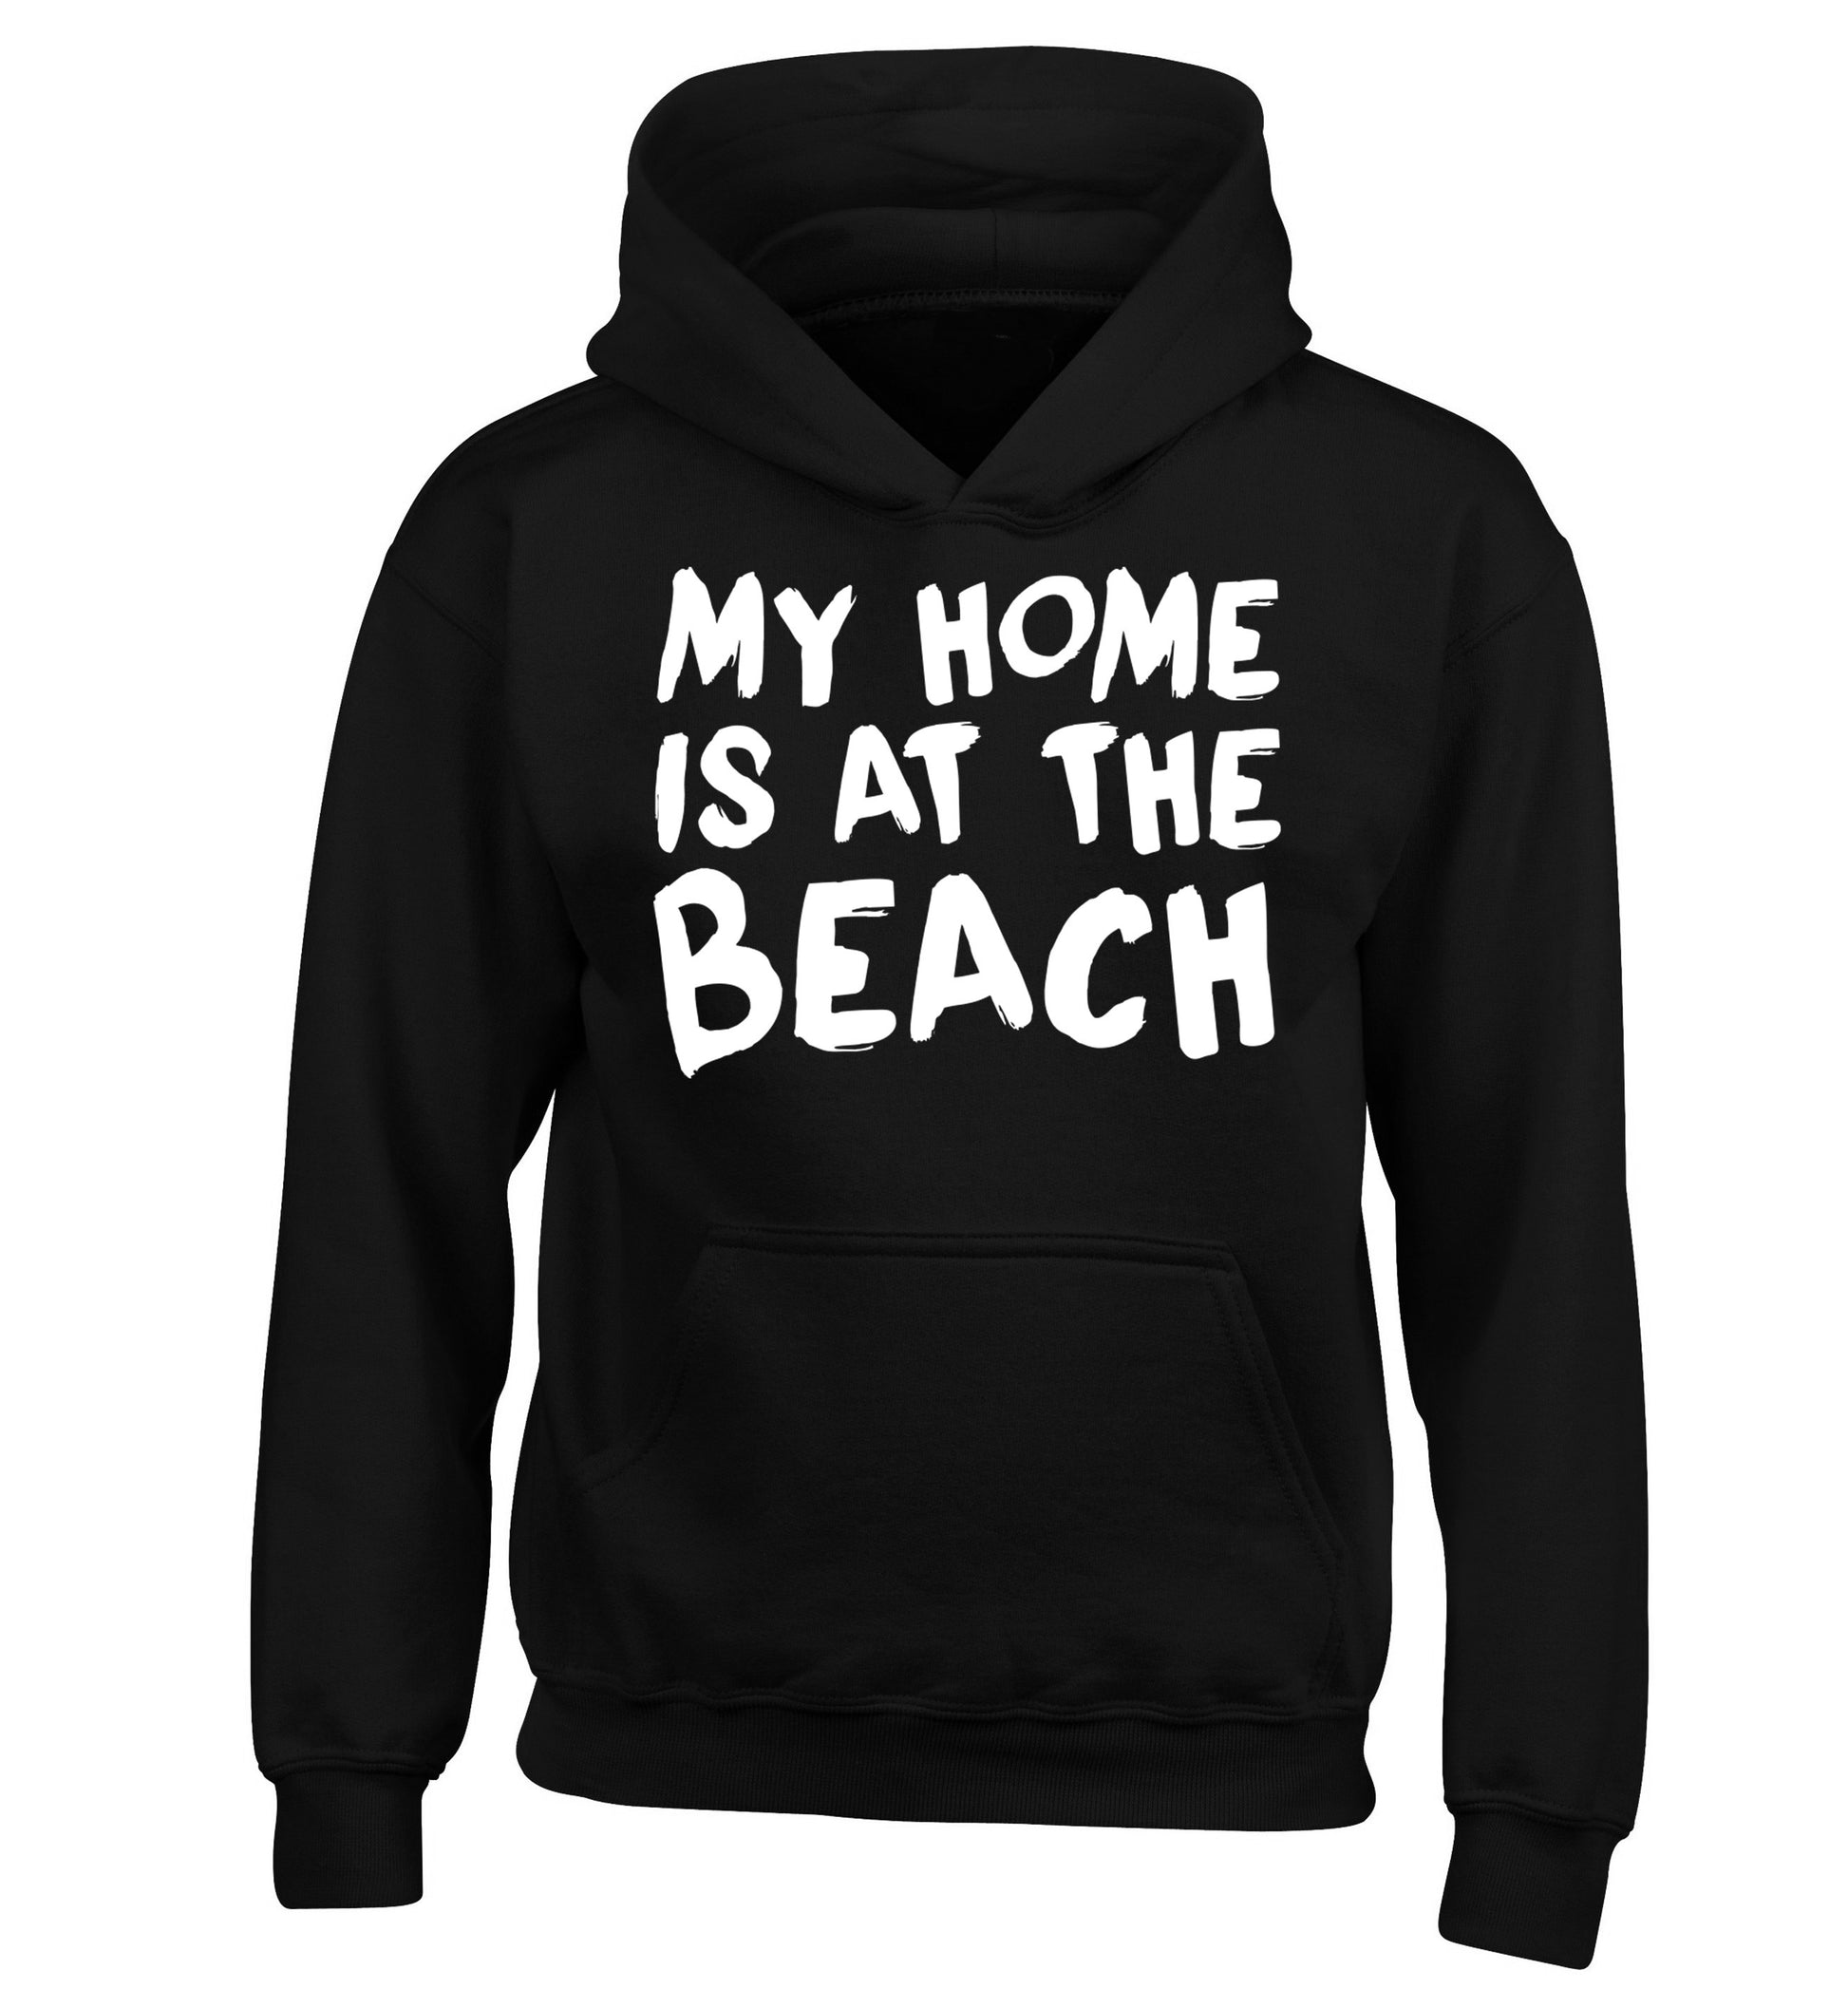 My home is at the beach children's black hoodie 12-14 Years